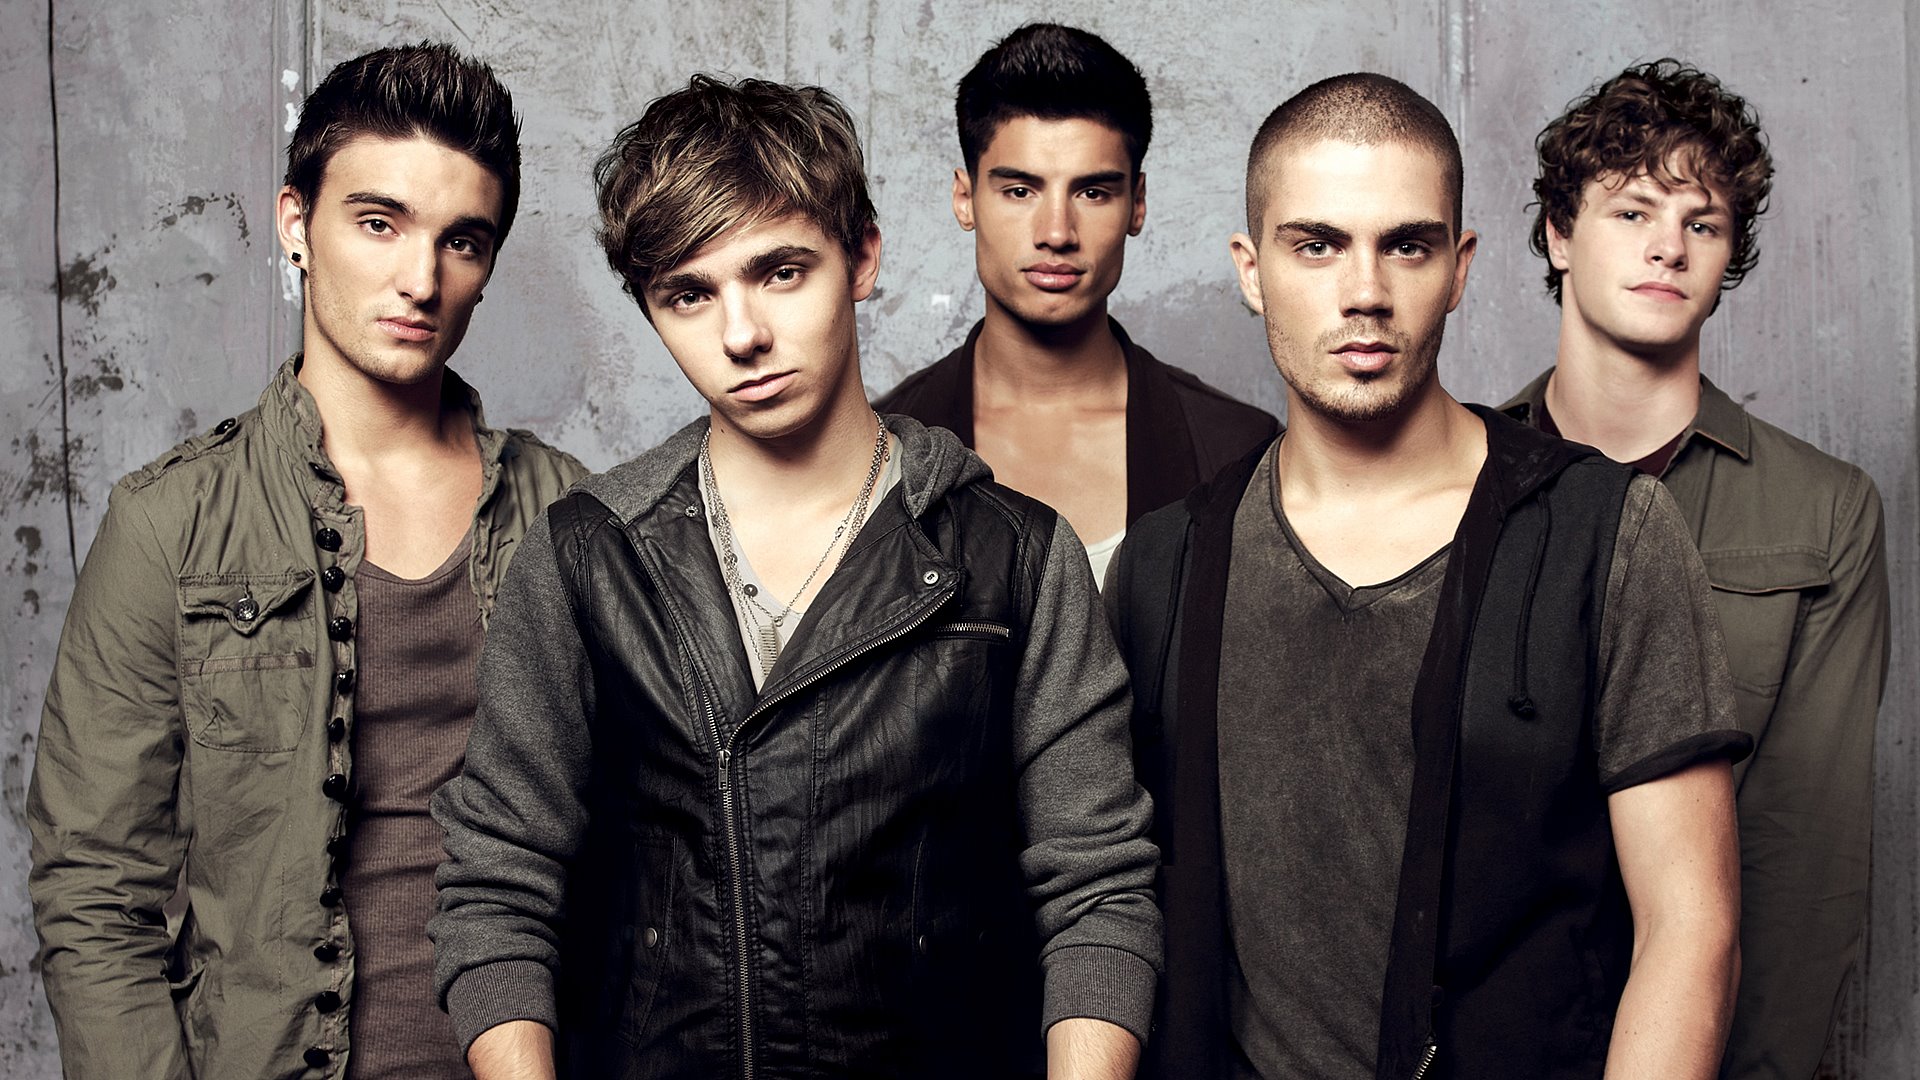 The Wanted Backgrounds, Compatible - PC, Mobile, Gadgets| 1920x1080 px